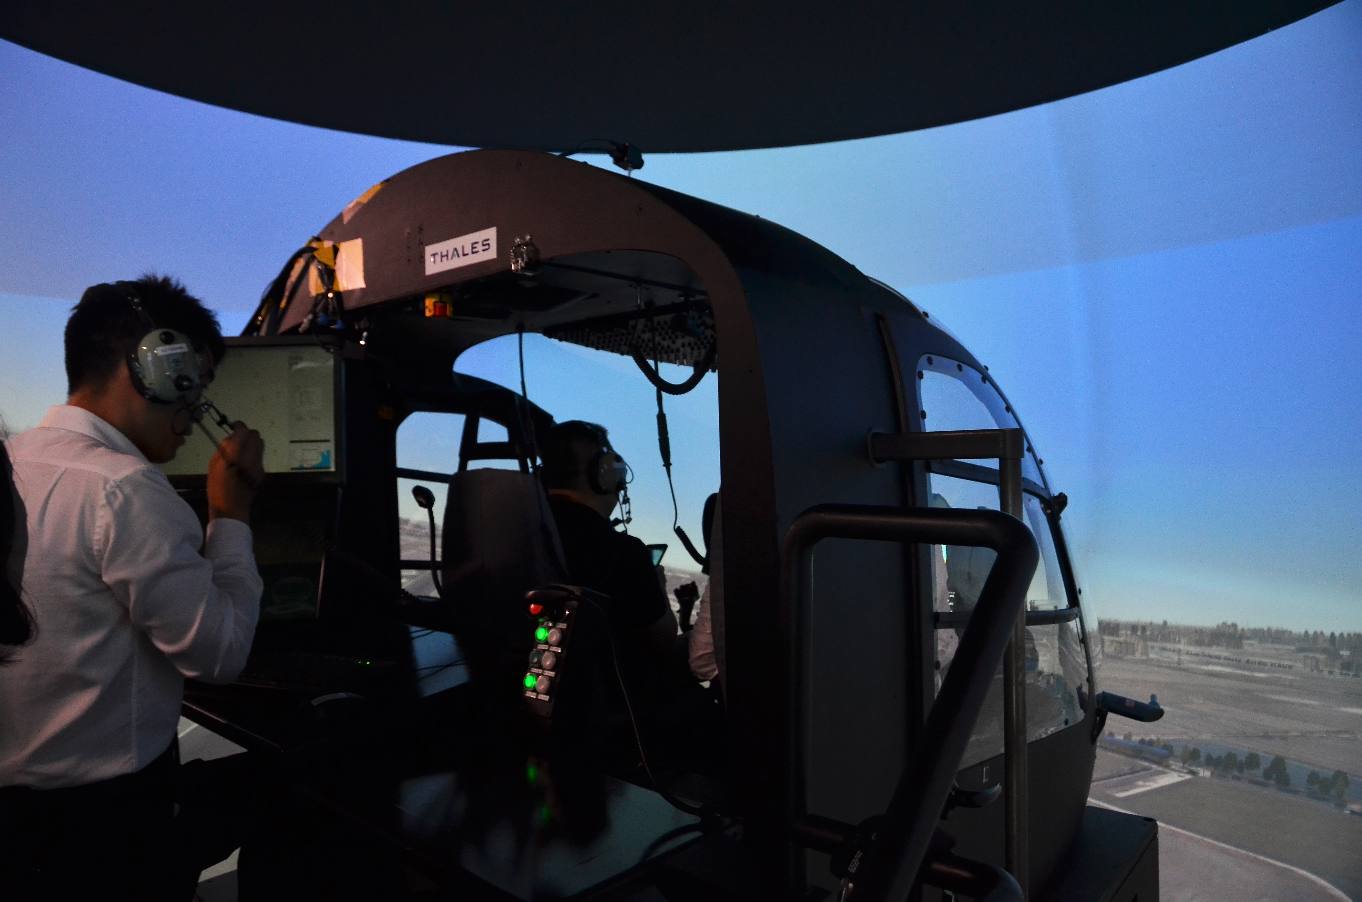 Chinese qualification for Thales EC135 simulator